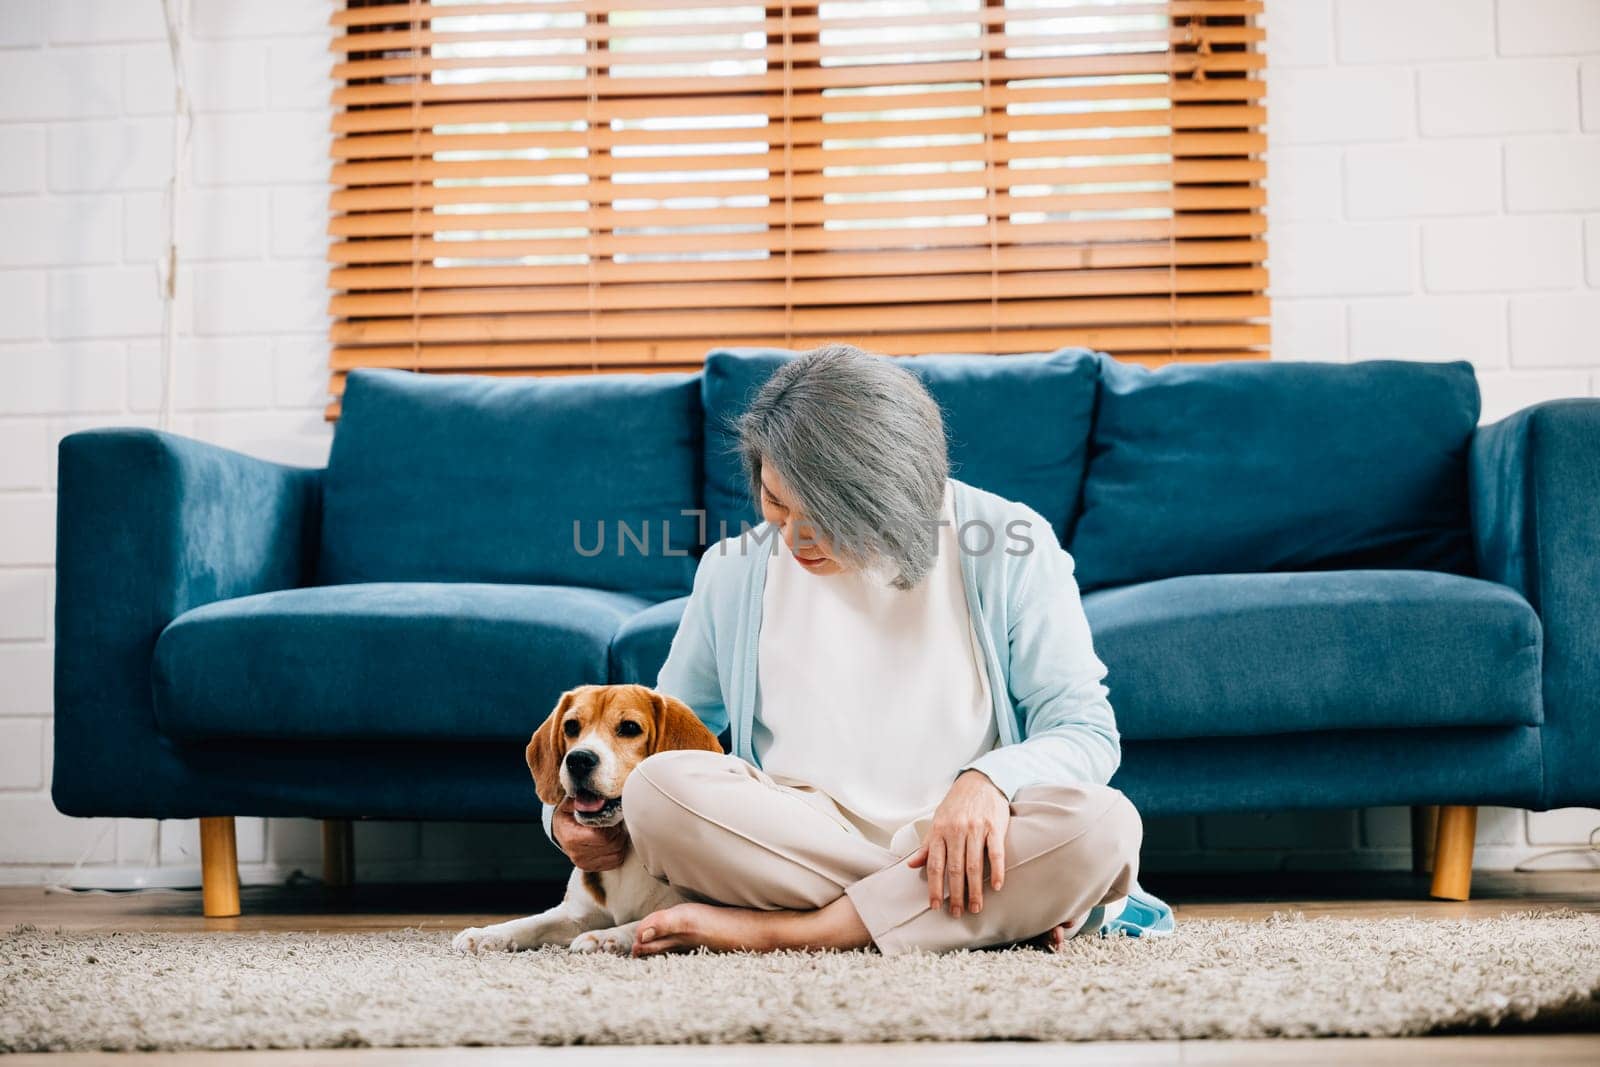 A portrait of happiness, An elderly woman and her Beagle puppy share a delightful moment on the sofa in their cozy living room. Their smiles reflect the togetherness and joy of pet companionship.